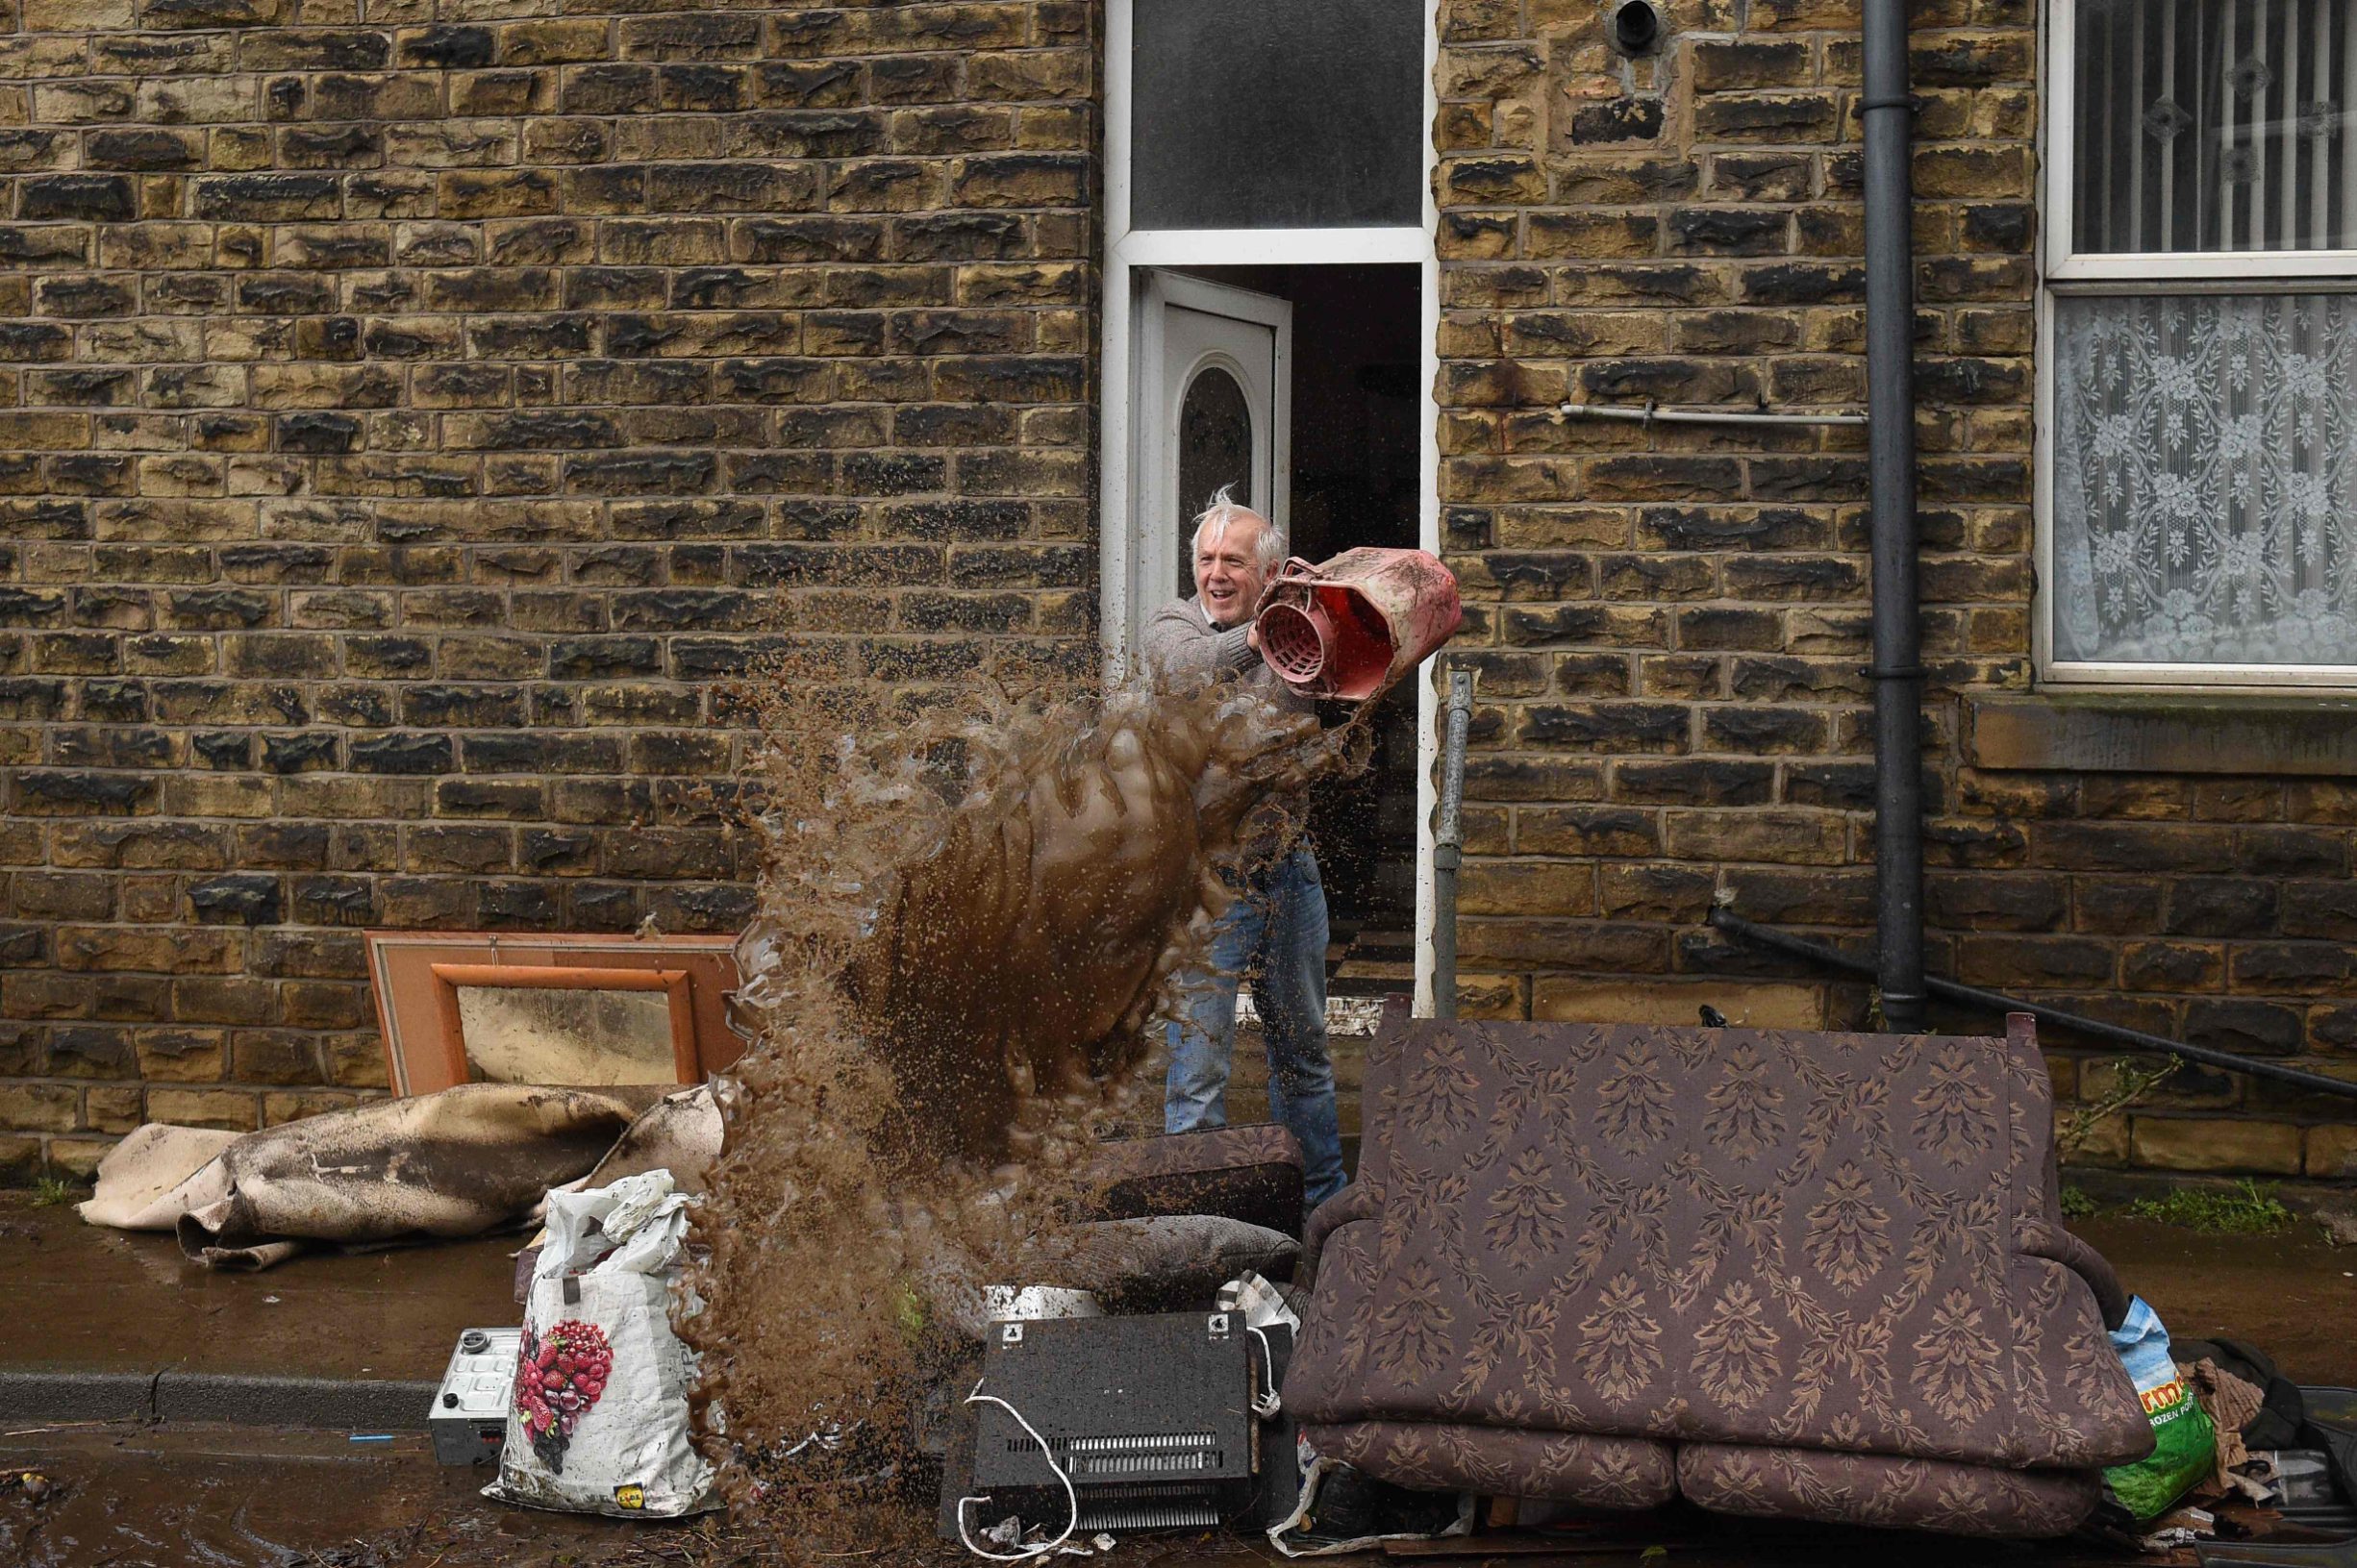 A man empties a bucket of water over debris outside a house in Mytholmroyd, northern England, on February 10, 2020 after flooding brought by Storm Ciara. - Storm Ciara grounded hundreds of flights Monday and left swatches of Europe without power after unleashing torrential rain and causing flash flooding that cancelled football matches in Britain. (Photo by Oli SCARFF / AFP)